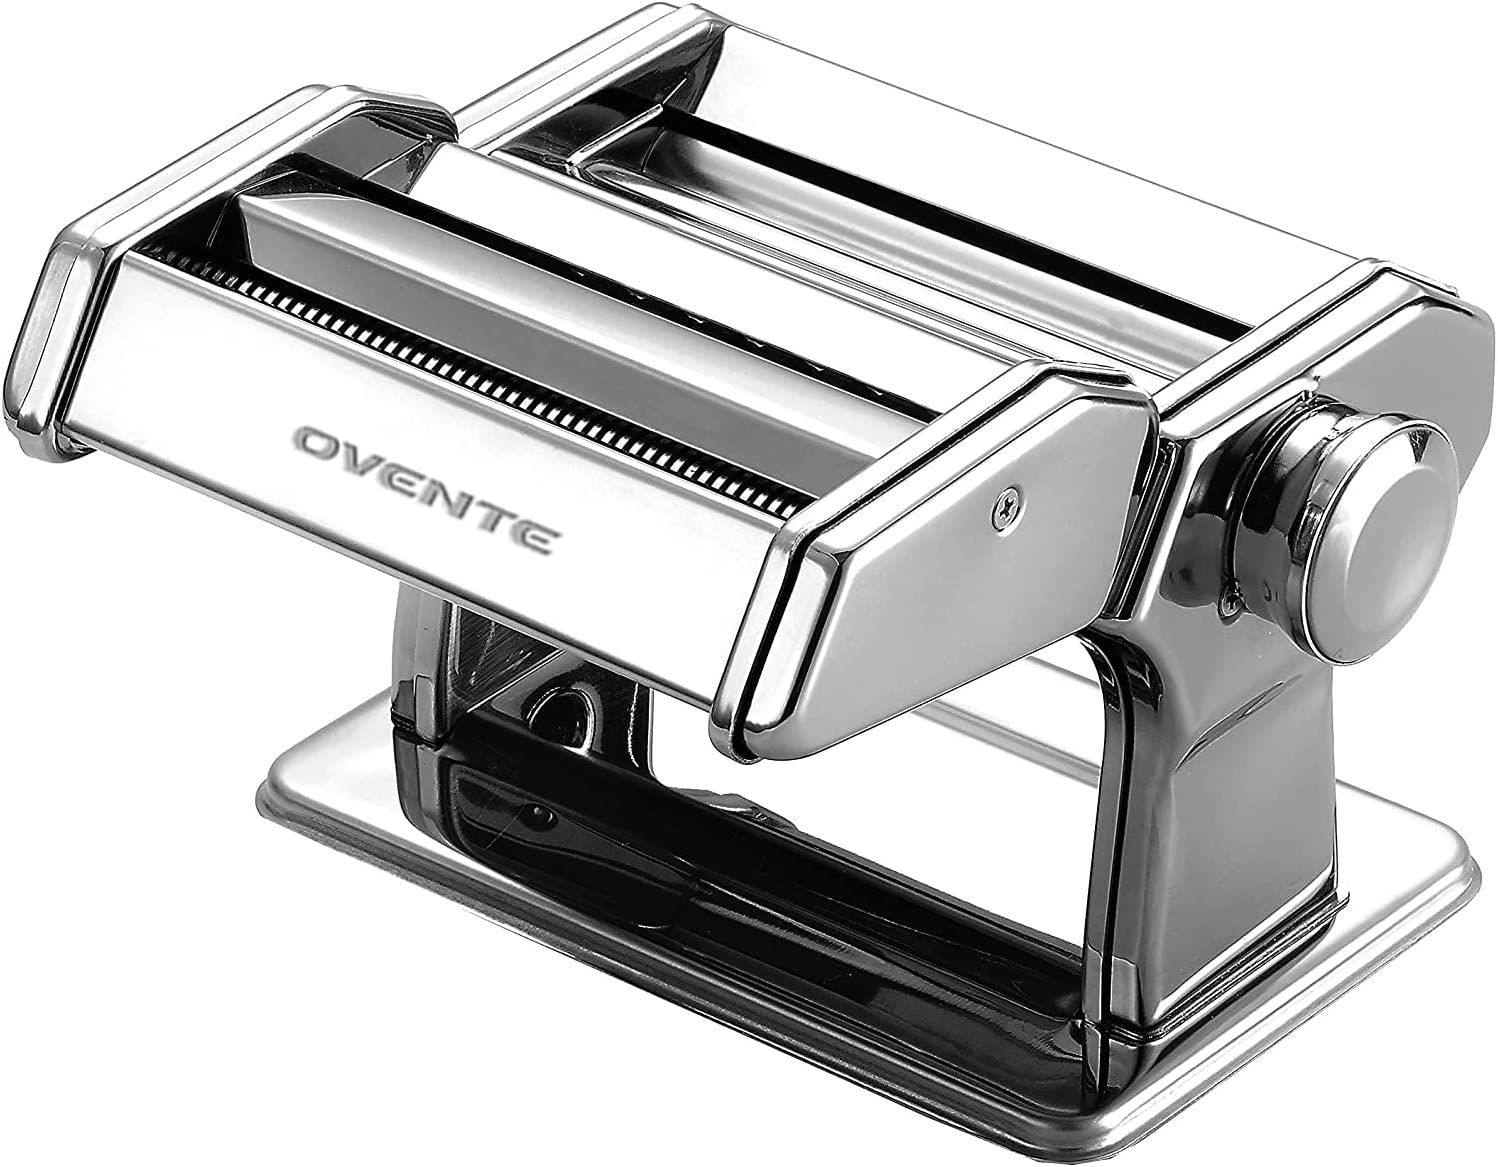 Ovente Manual Stainless Steel Pasta Maker Machine and 7 Thickness Setting (0.5 to 3 mm), Easy Cleaning & Storage with